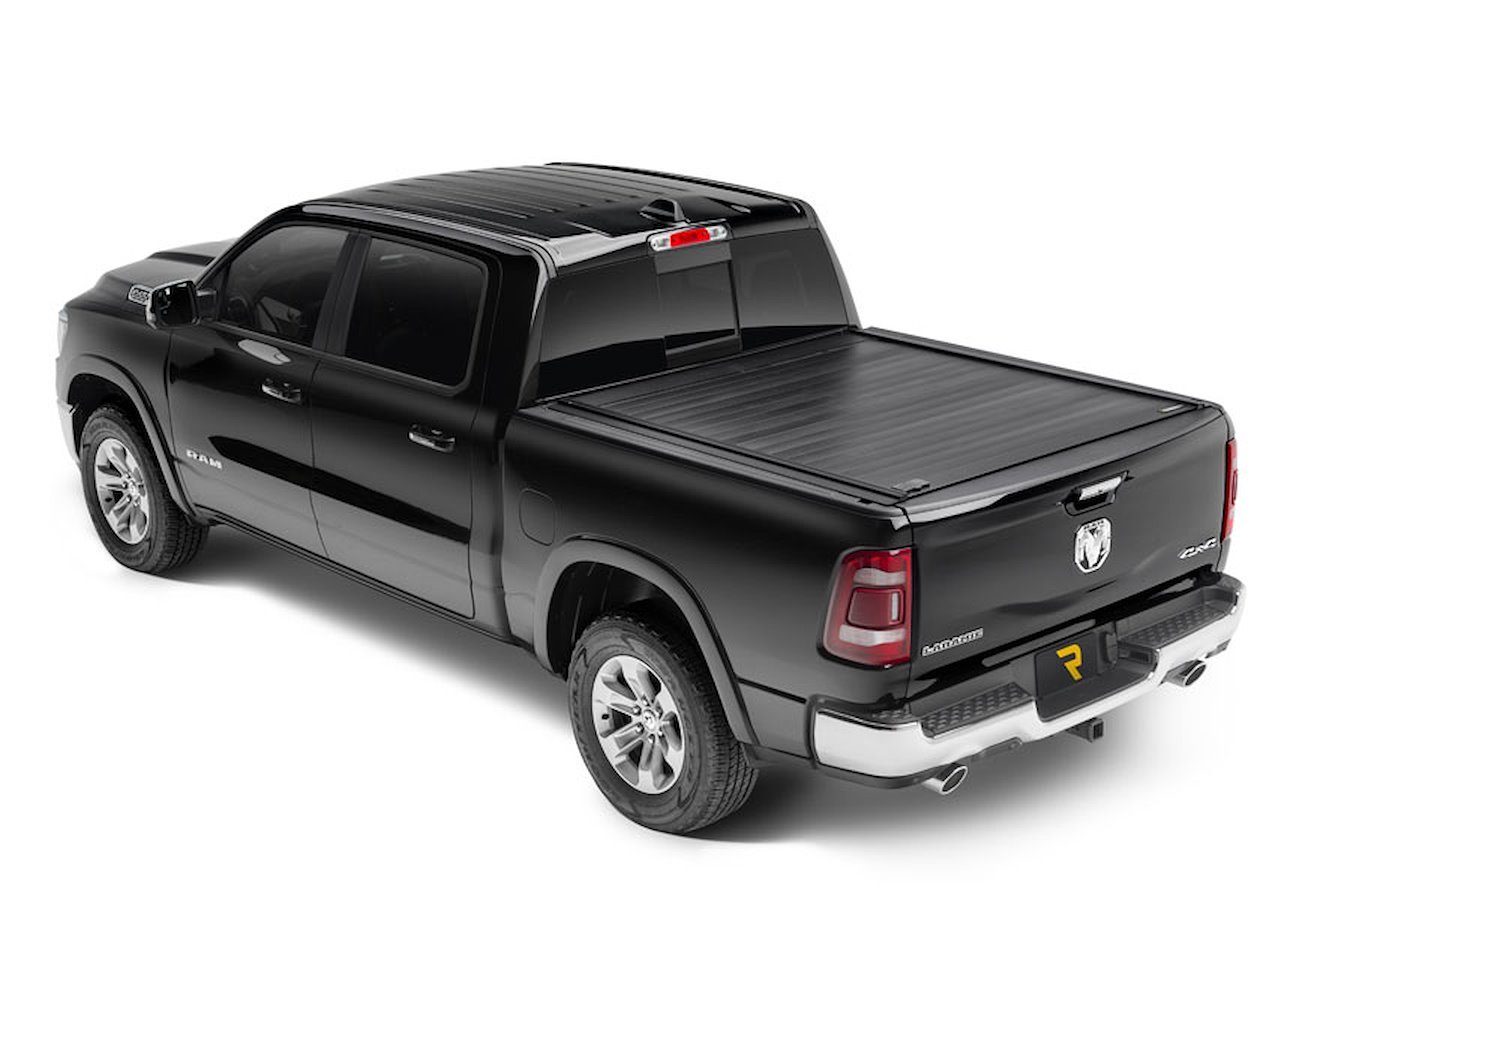 80231 RetraxPRO MX Retractable Tonneau Cover Fits Select Dodge/Ram 5' 7" Bed without RamBox without Stake Pockets